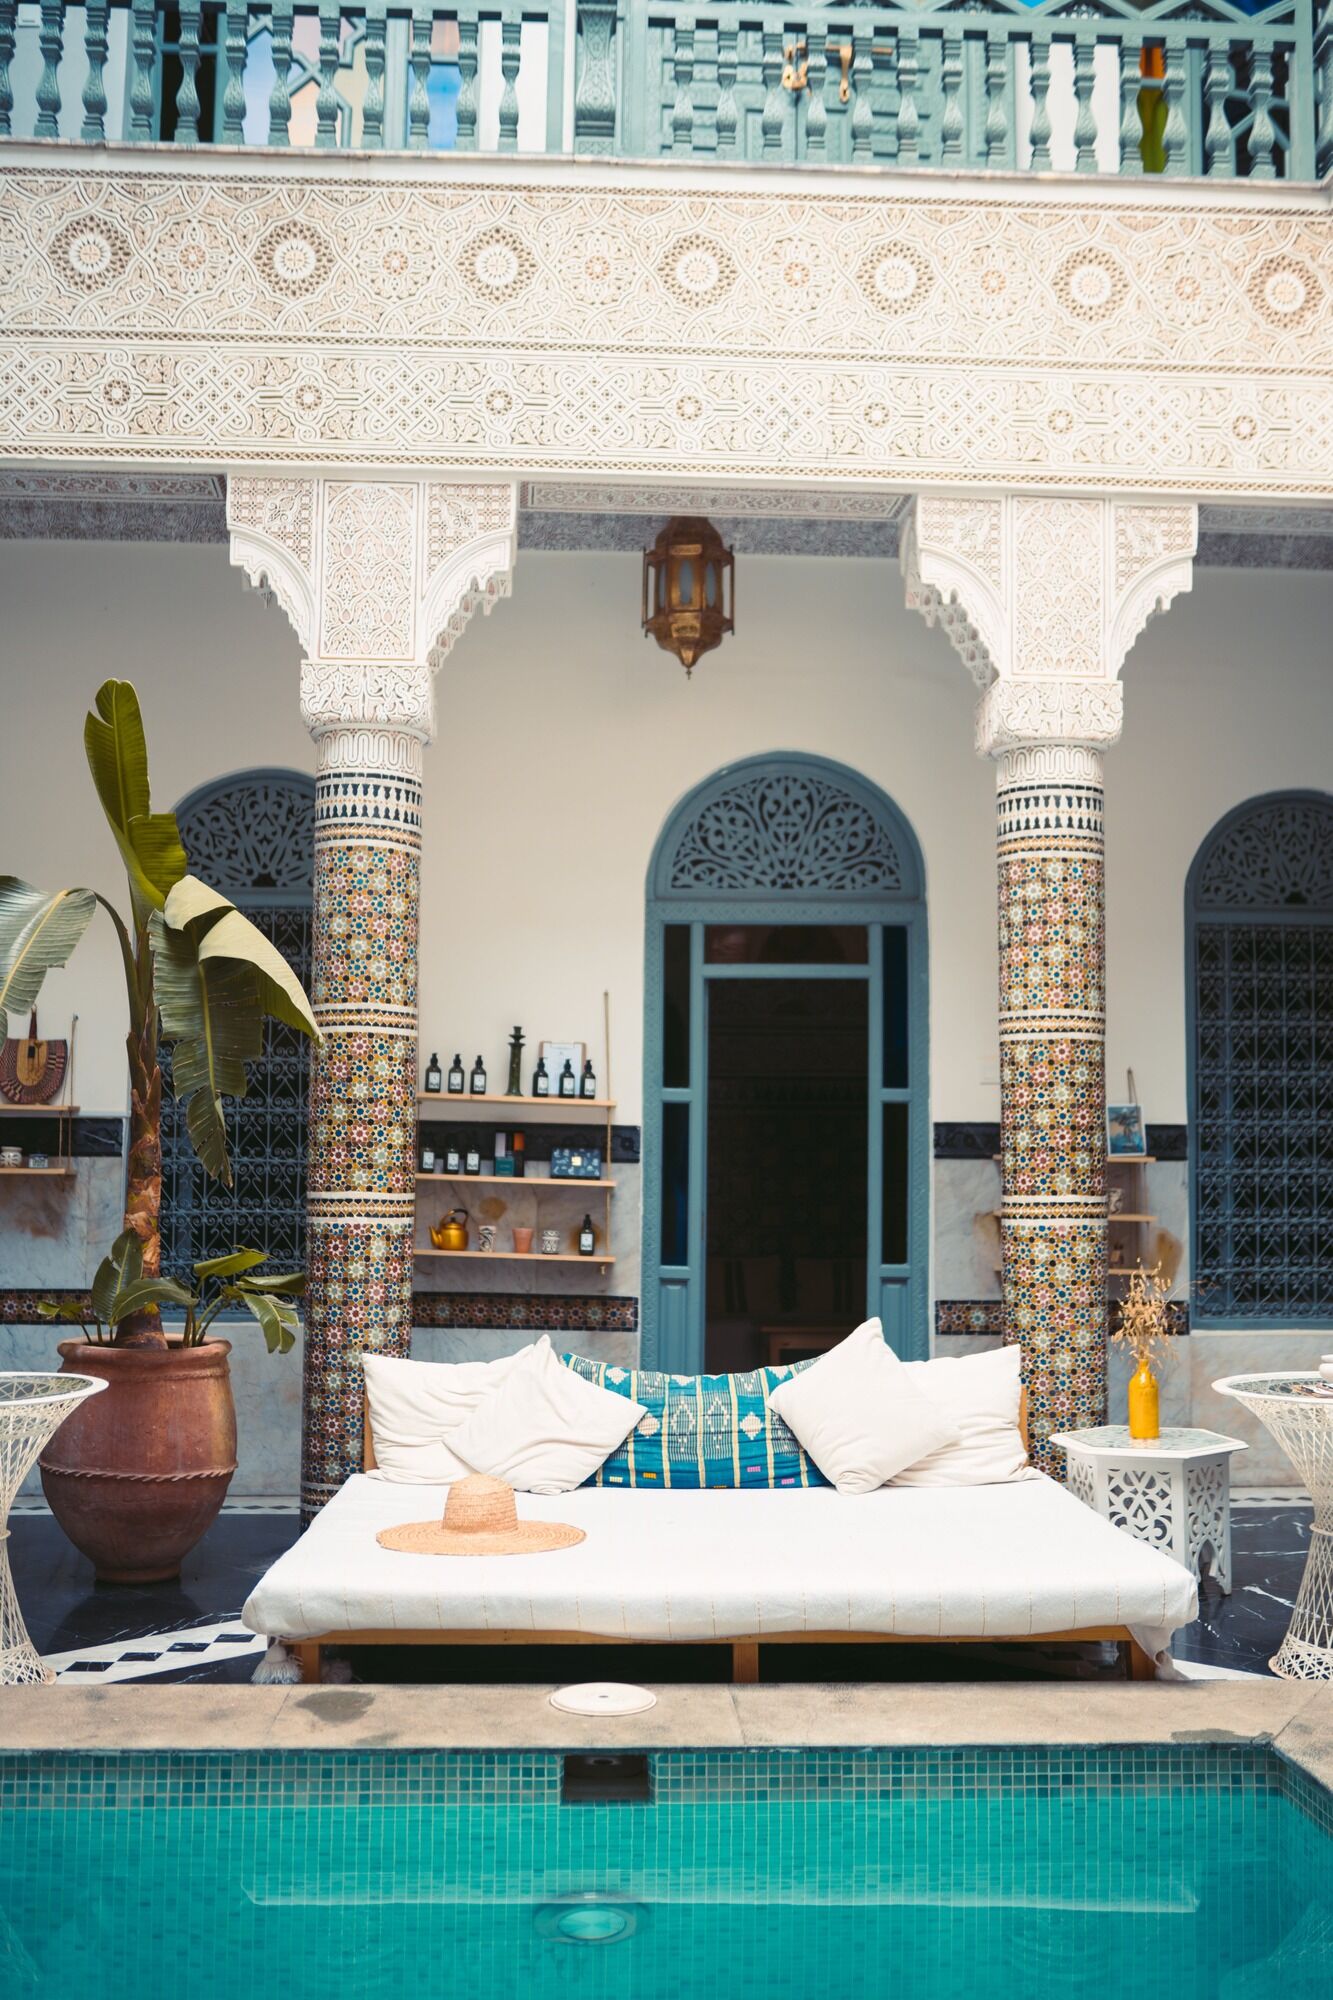 TOP 14 best hotels in Marrakech: from royal villas with pools and hammams to Berber tents in exotic locations